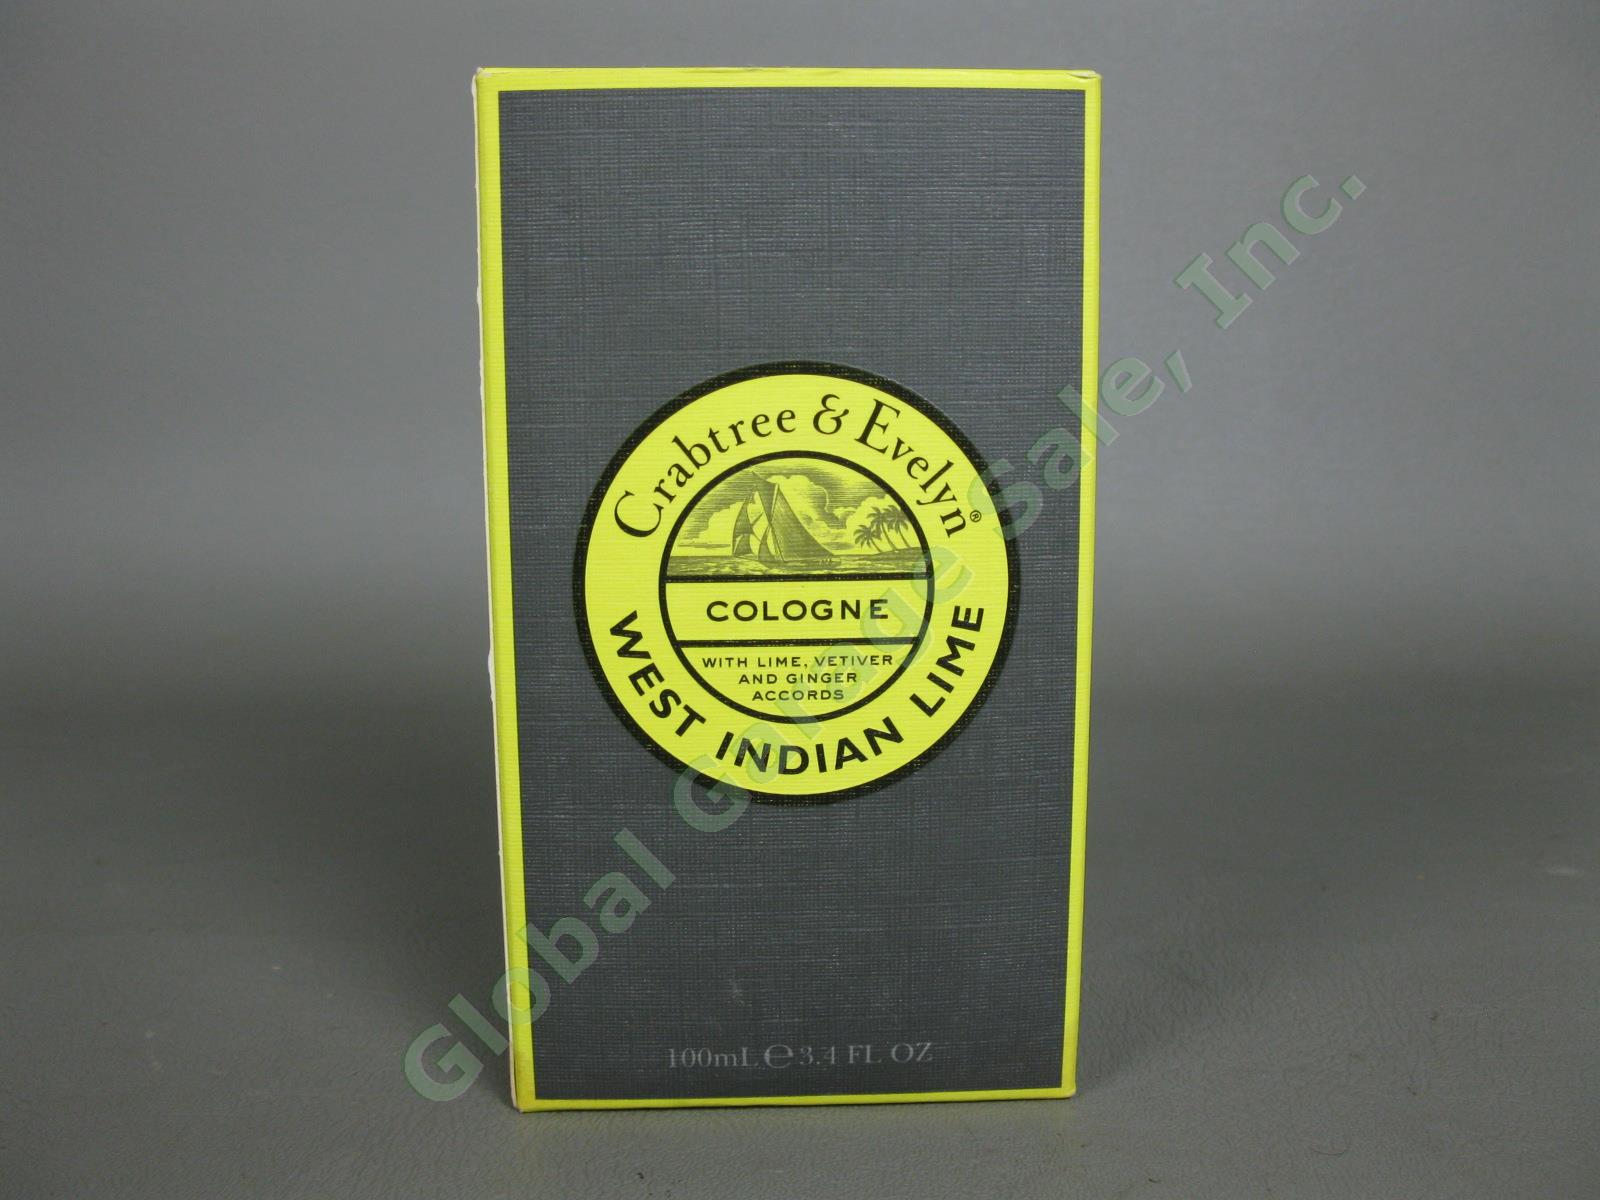 NEW Crabtree & Evelyn West Indian Lime Cologne 3.4oz/100mL Fragrance Spray NR 3